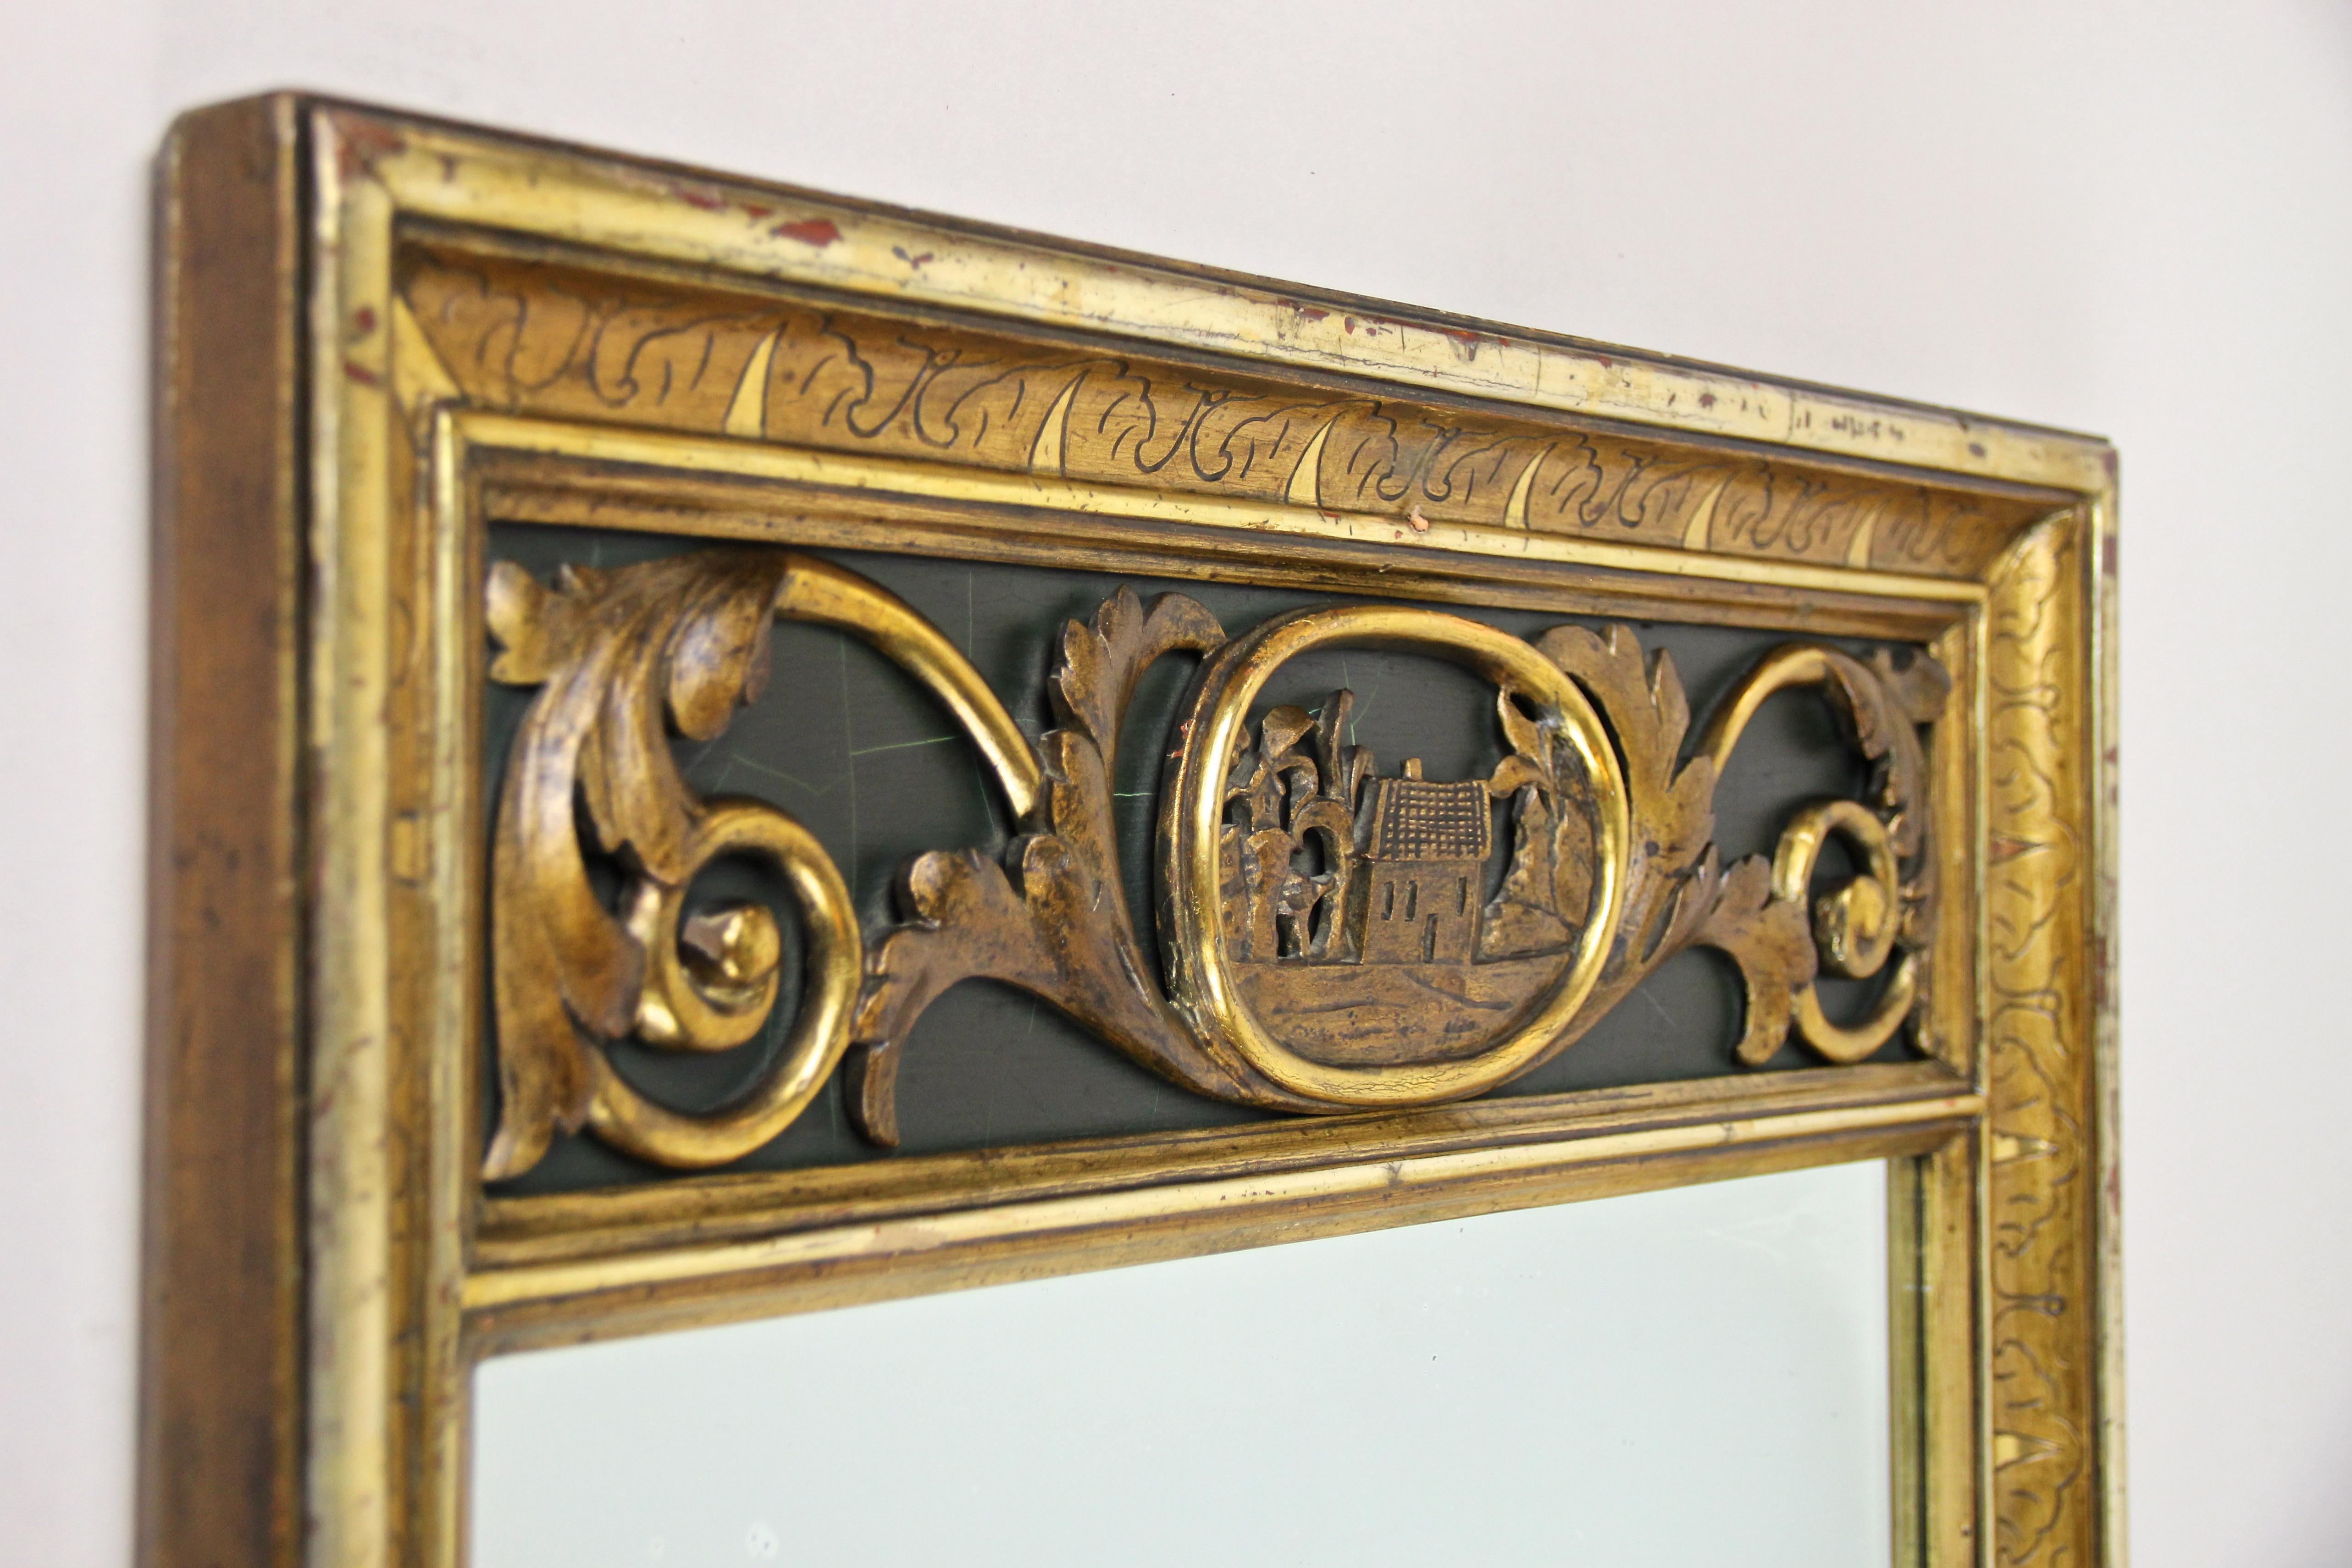 Remarkable 19th century gilt wall mirror or trumeau mirror from the early Biedermeier period in Austria, circa 1825. In absolute rare original condition - no former restorations has been done - comes this beautiful golden trumeau mirror with